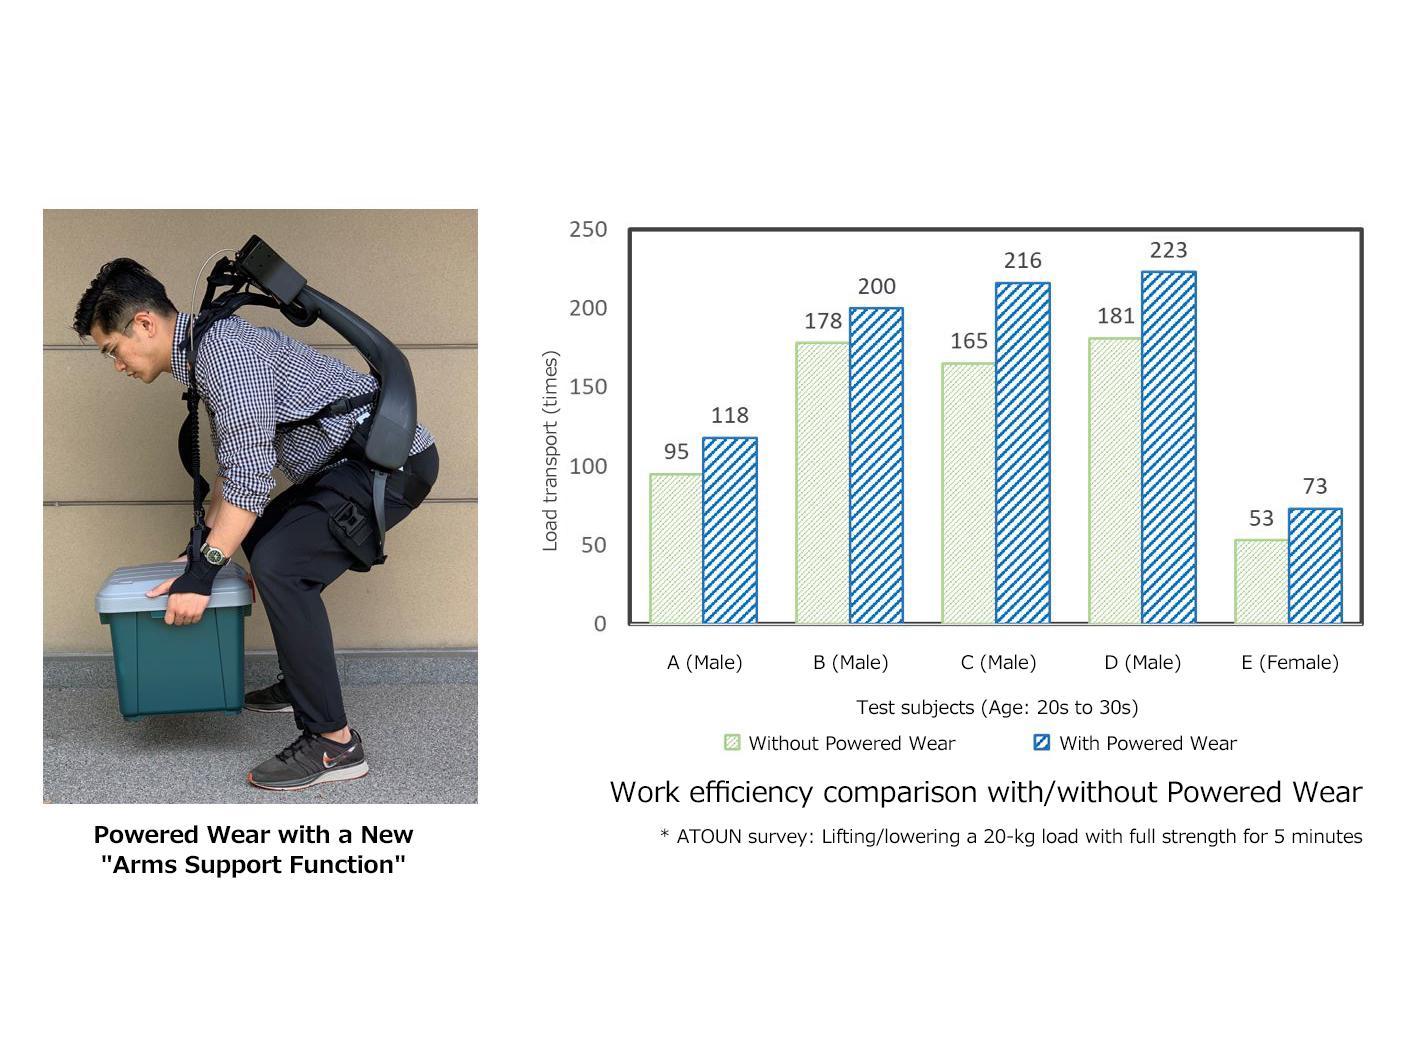 image: Efficiency comparison with/without Powered Wear equipped with arms support function